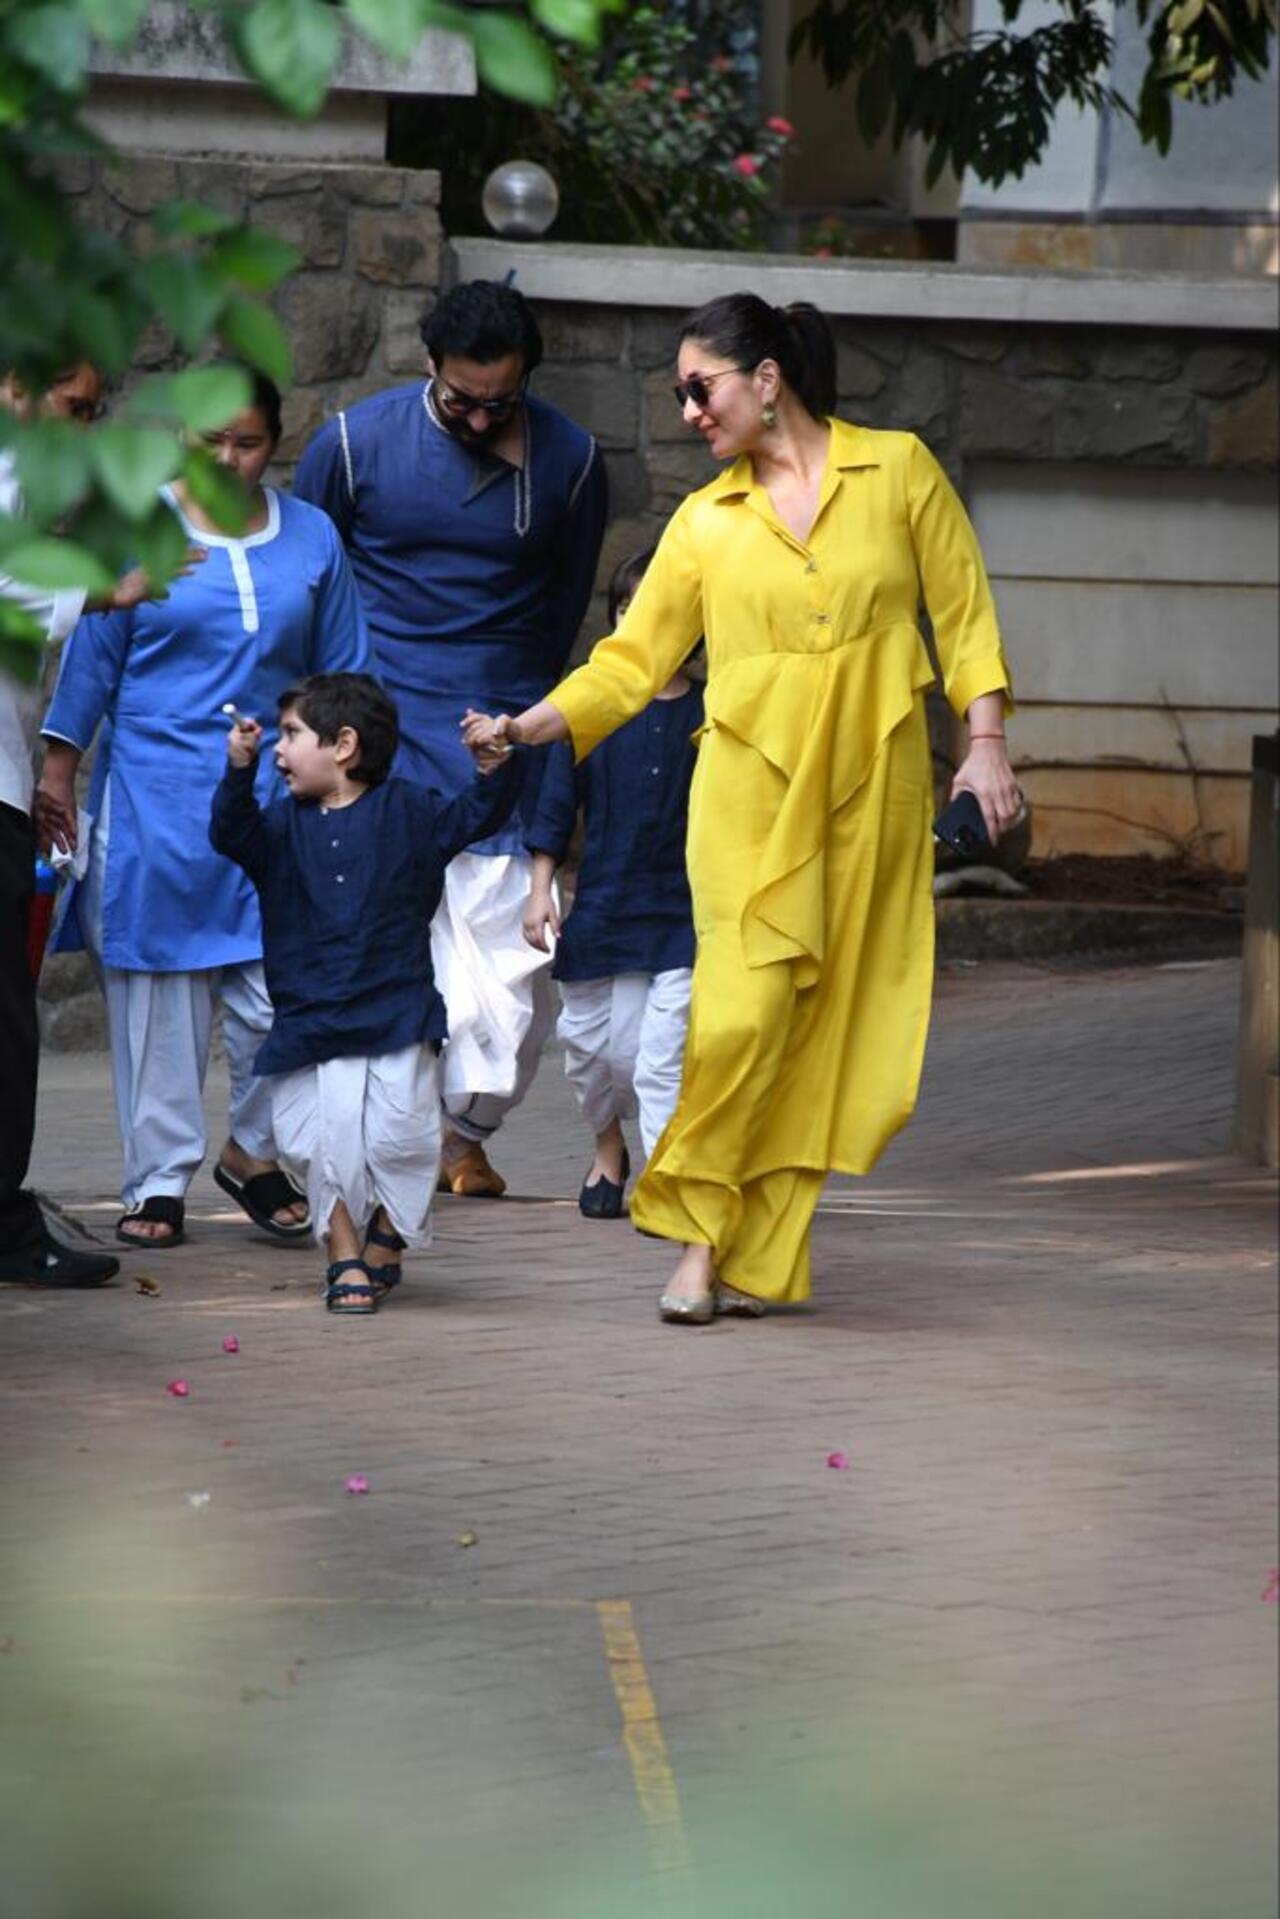 Kareena Kapoor looked bright in a yellow kurta as she tried to calm down a restless and enthusiastic Jeh